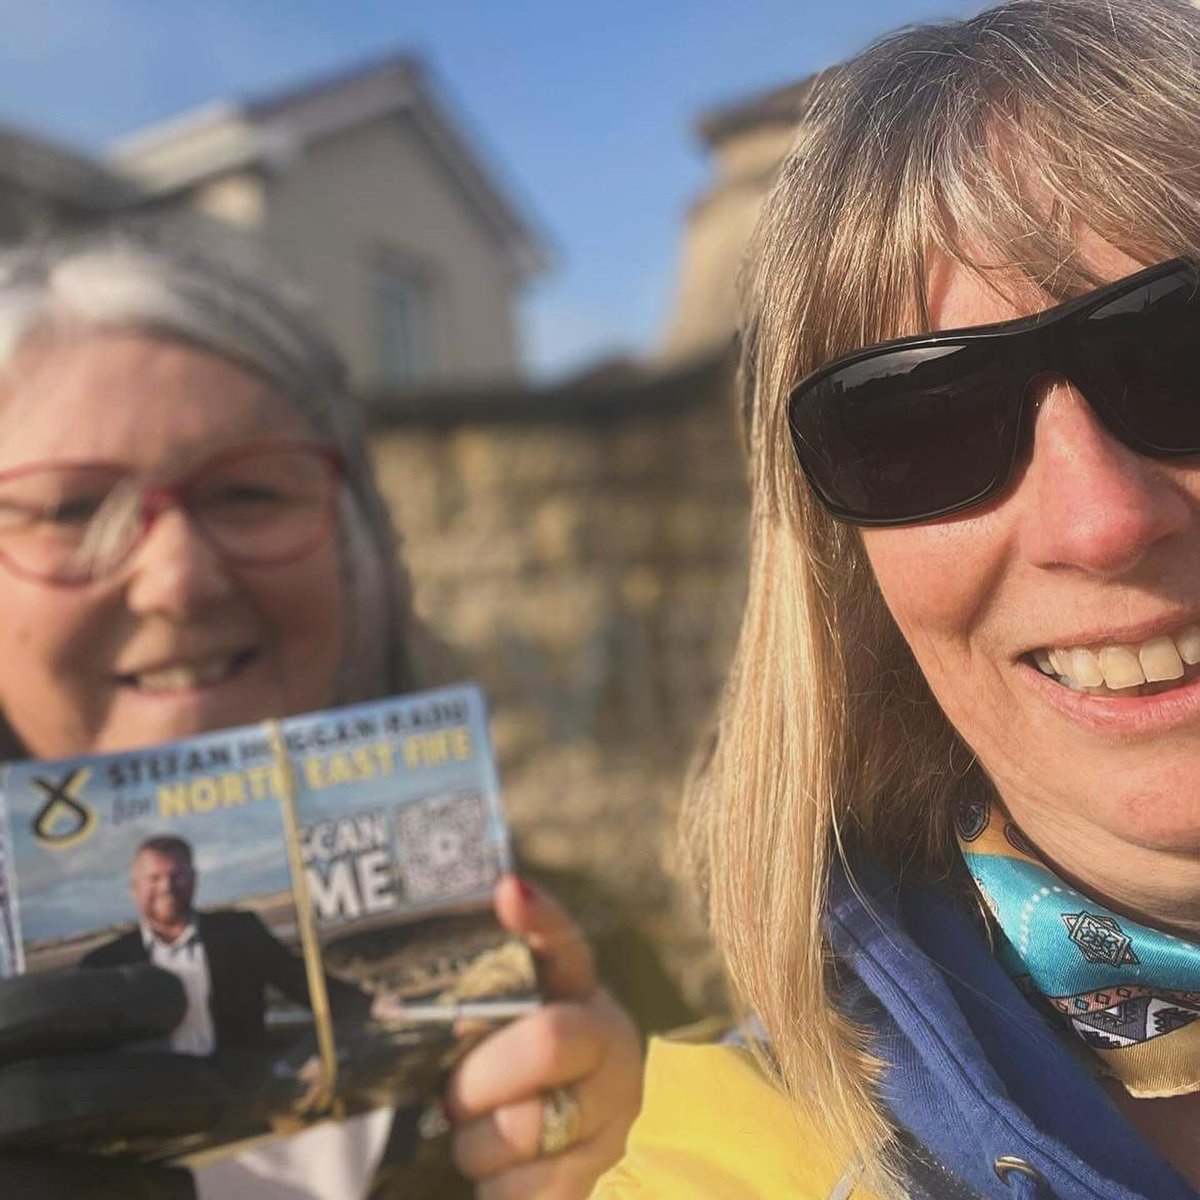 Thanks to the teams out campaigning across North East Fife today 🏴󠁧󠁢󠁳󠁣󠁴󠁿 #Stefan4NEF #VoteSNP #ActiveSNP